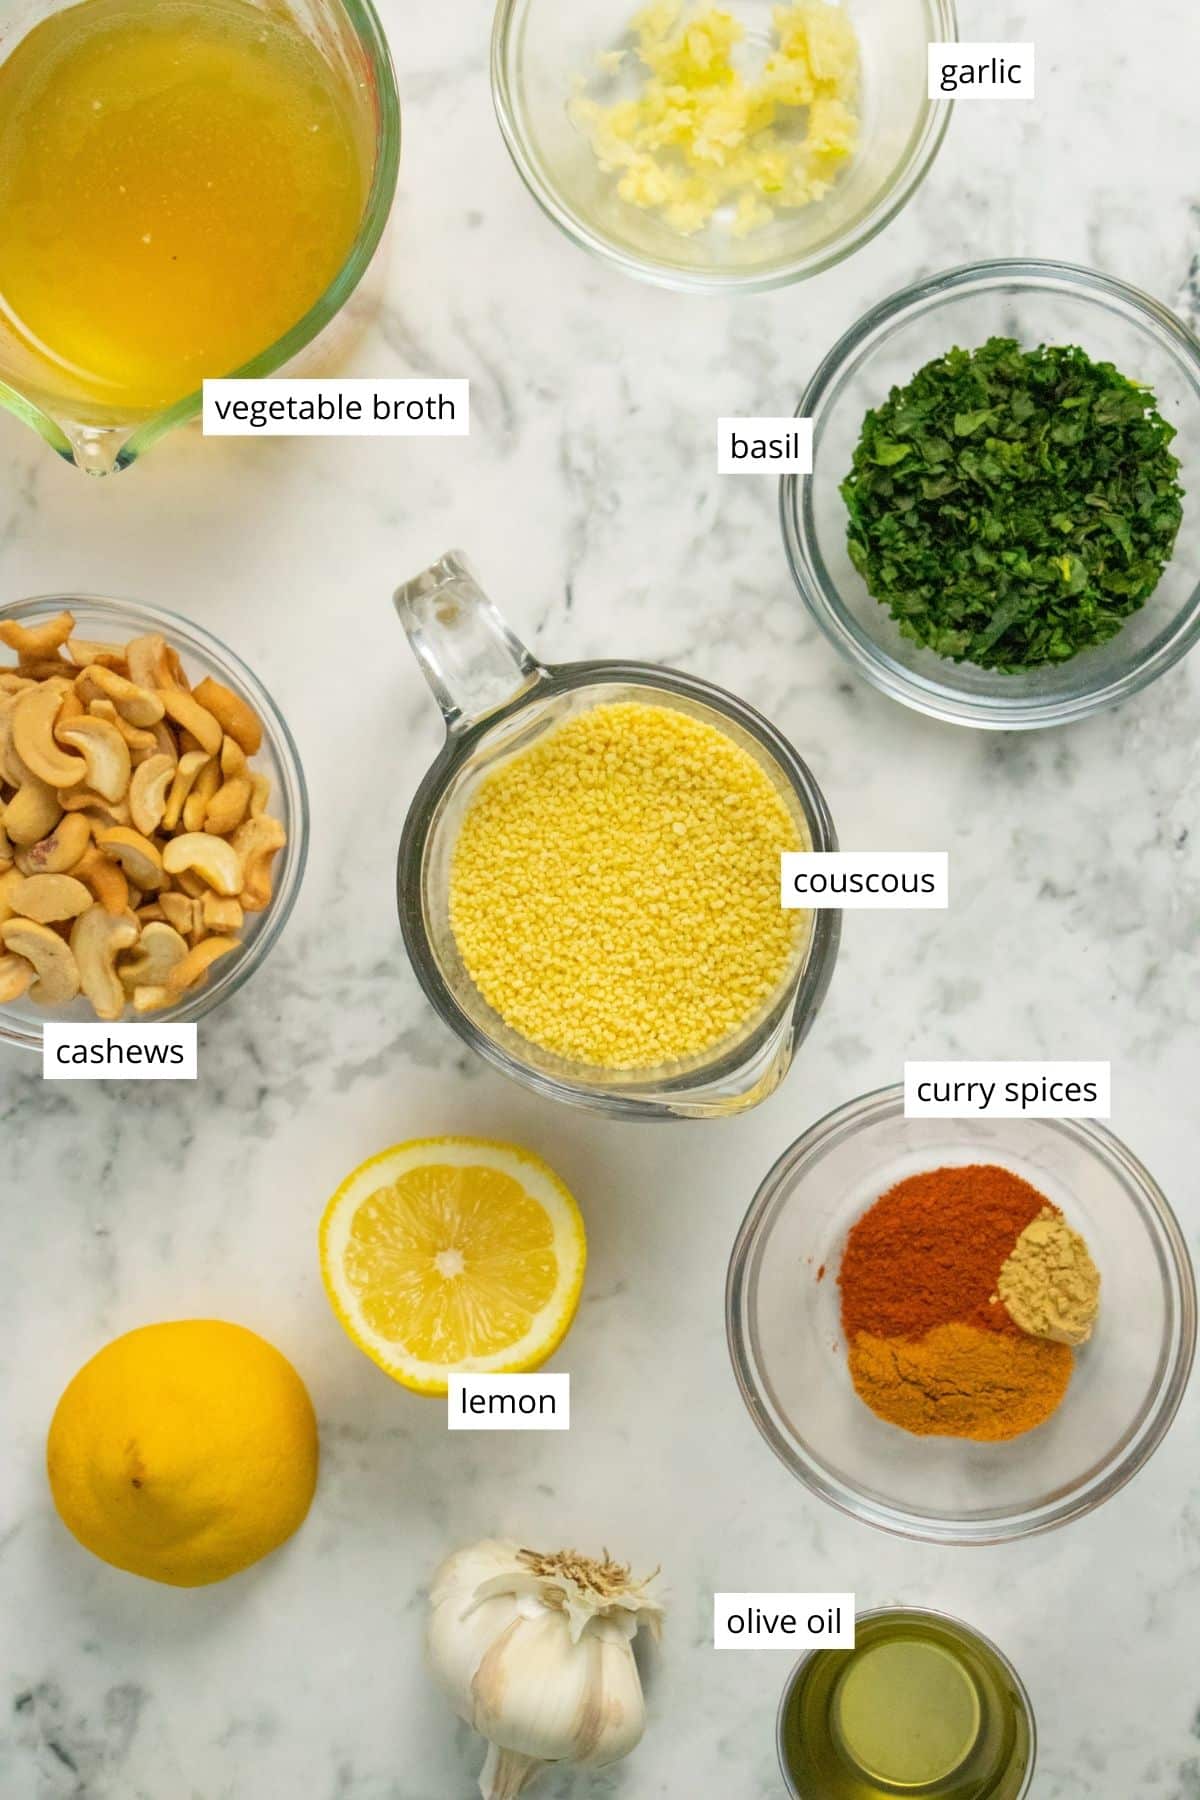 couscous, cashews, and seasonings in bowls on a kitchen countertop